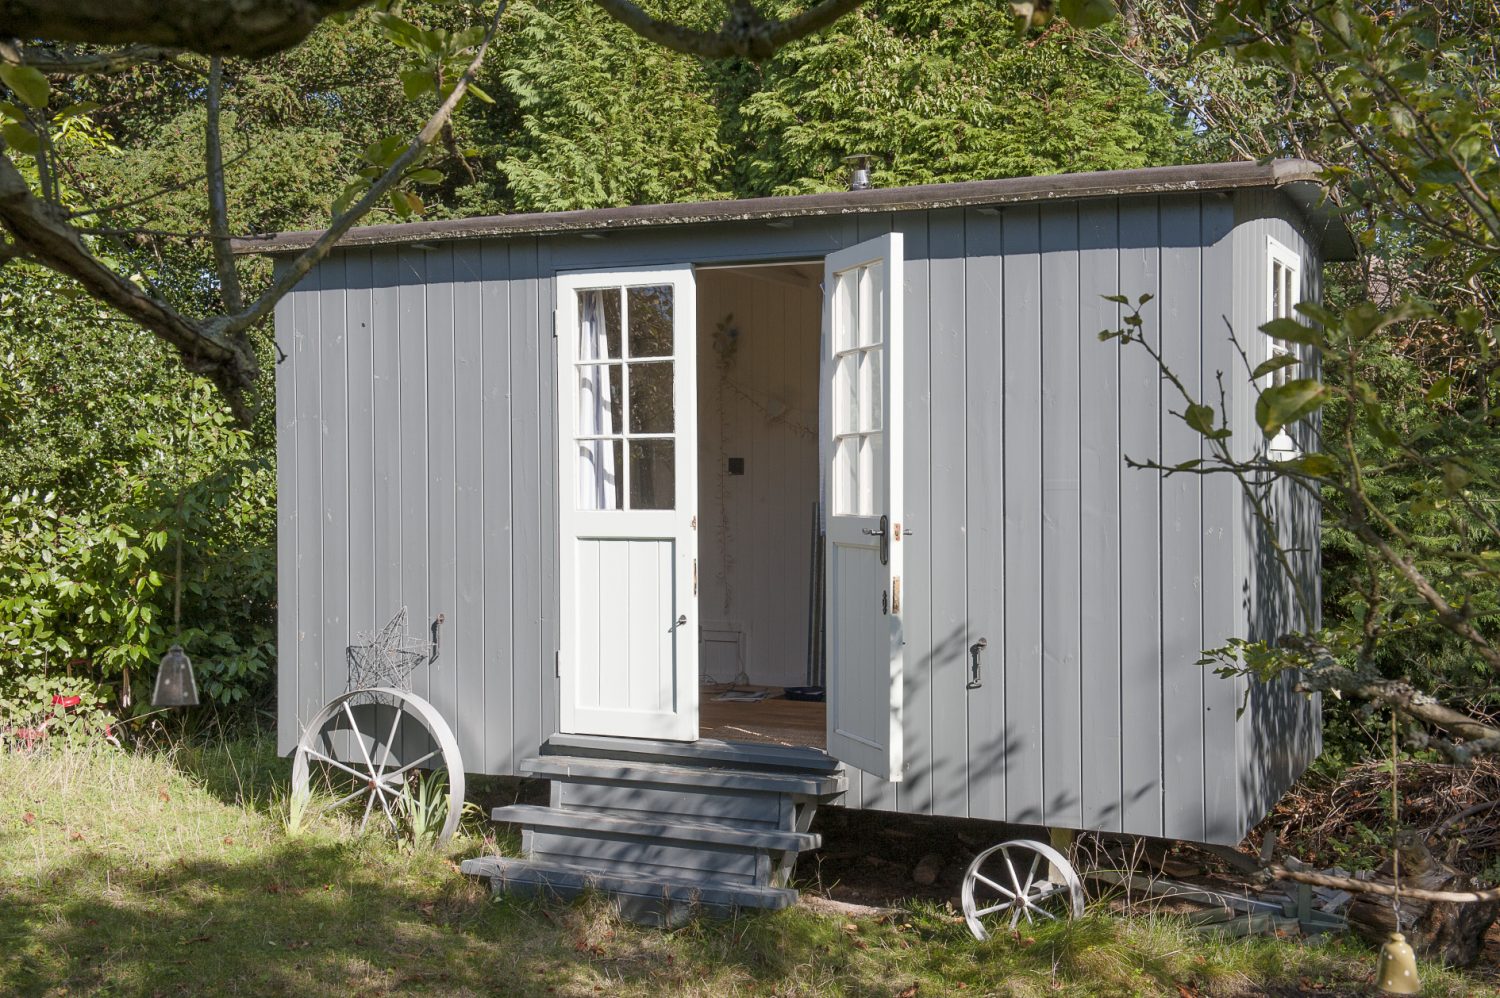 Outside, a shepherd’s hut acts as a retreat for the family